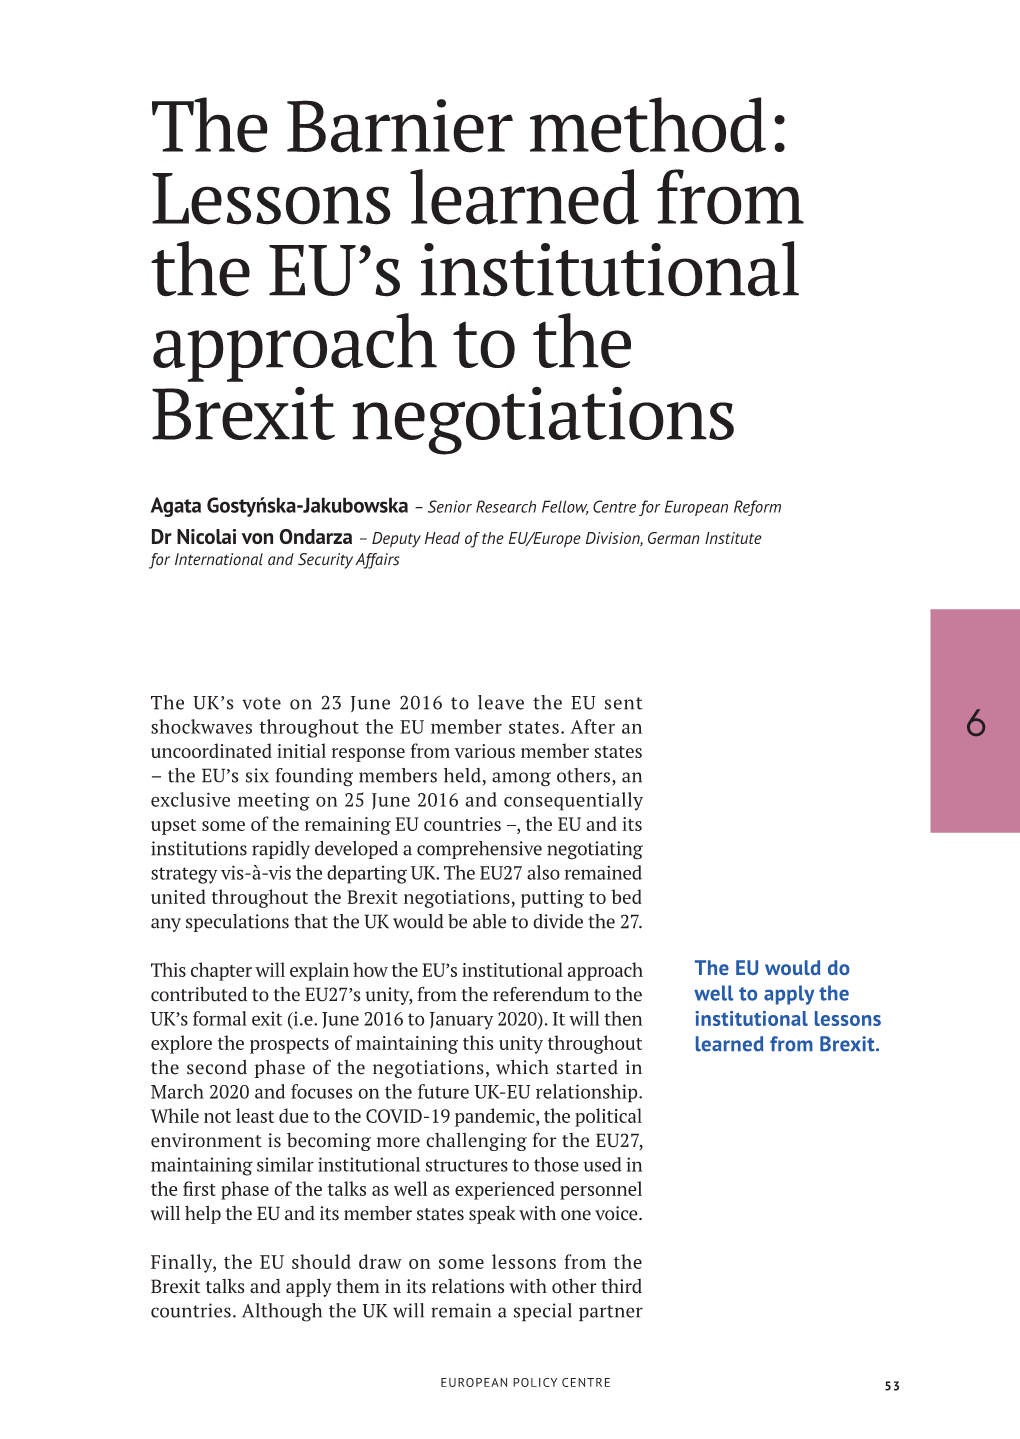 The Barnier Method: Lessons Learned from the EU's Institutional Approach